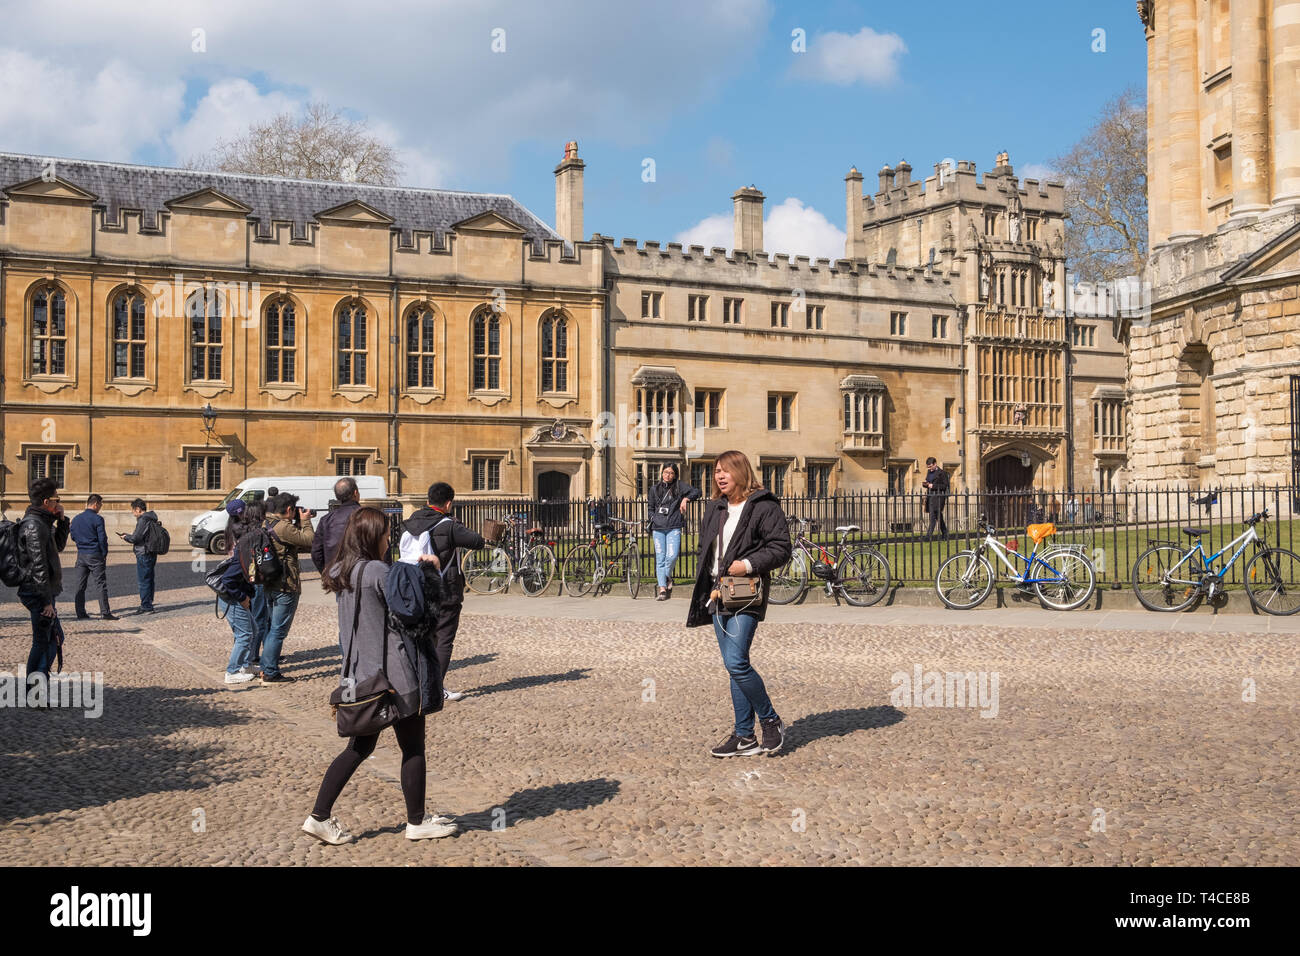 Tourists taking photographs in Radcliffe Square, University of Oxford, Oxford, UK Stock Photo